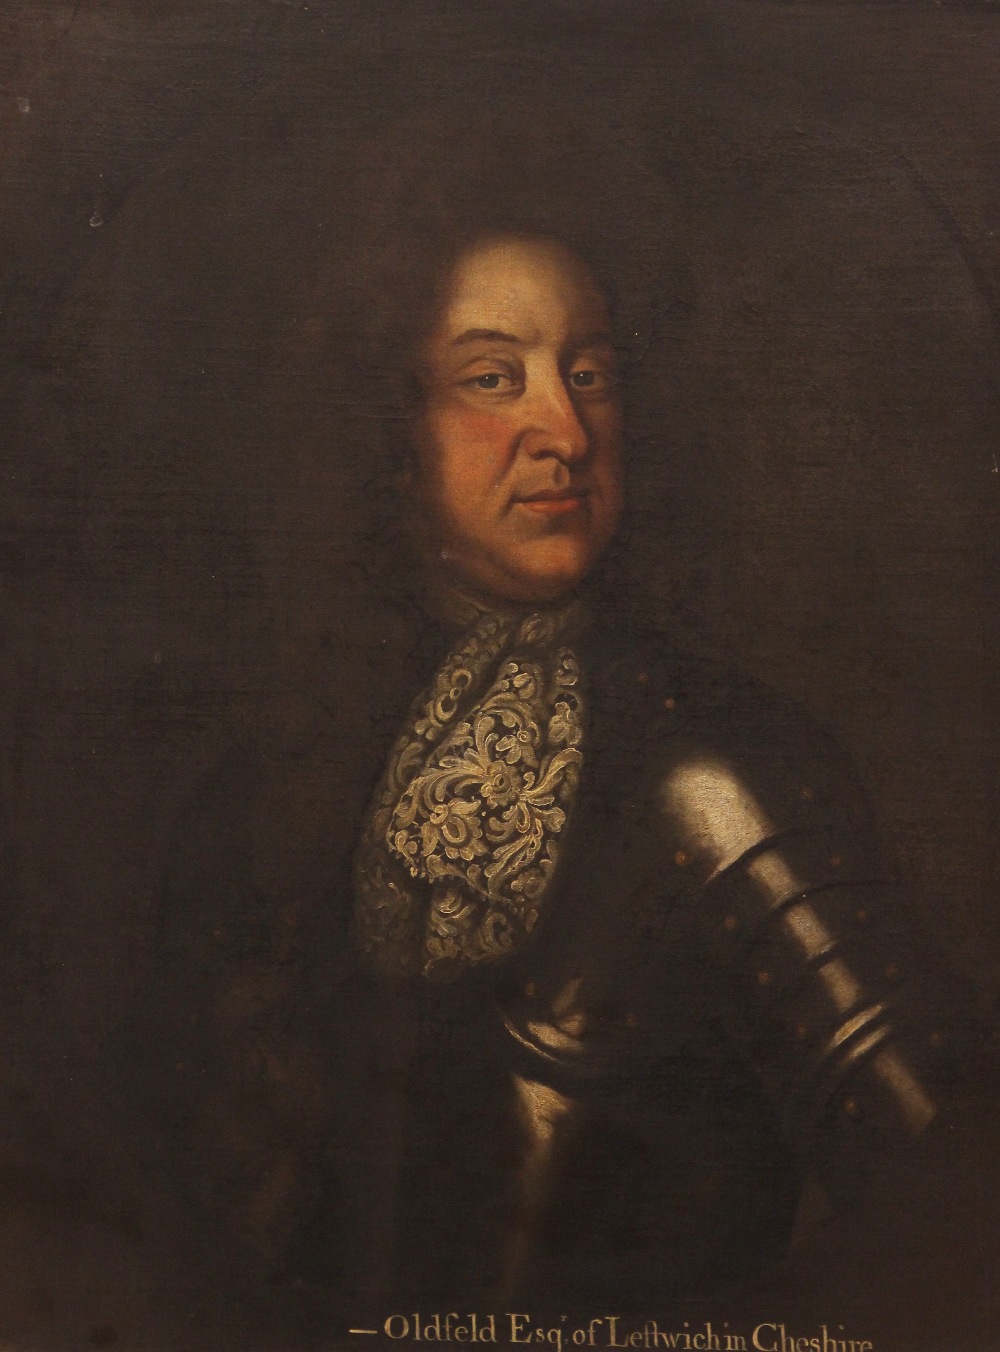 Follower of Godfrey Kneller (1646-1723), Portrait of Oldfield Esq of Leftwich in Cheshire Half